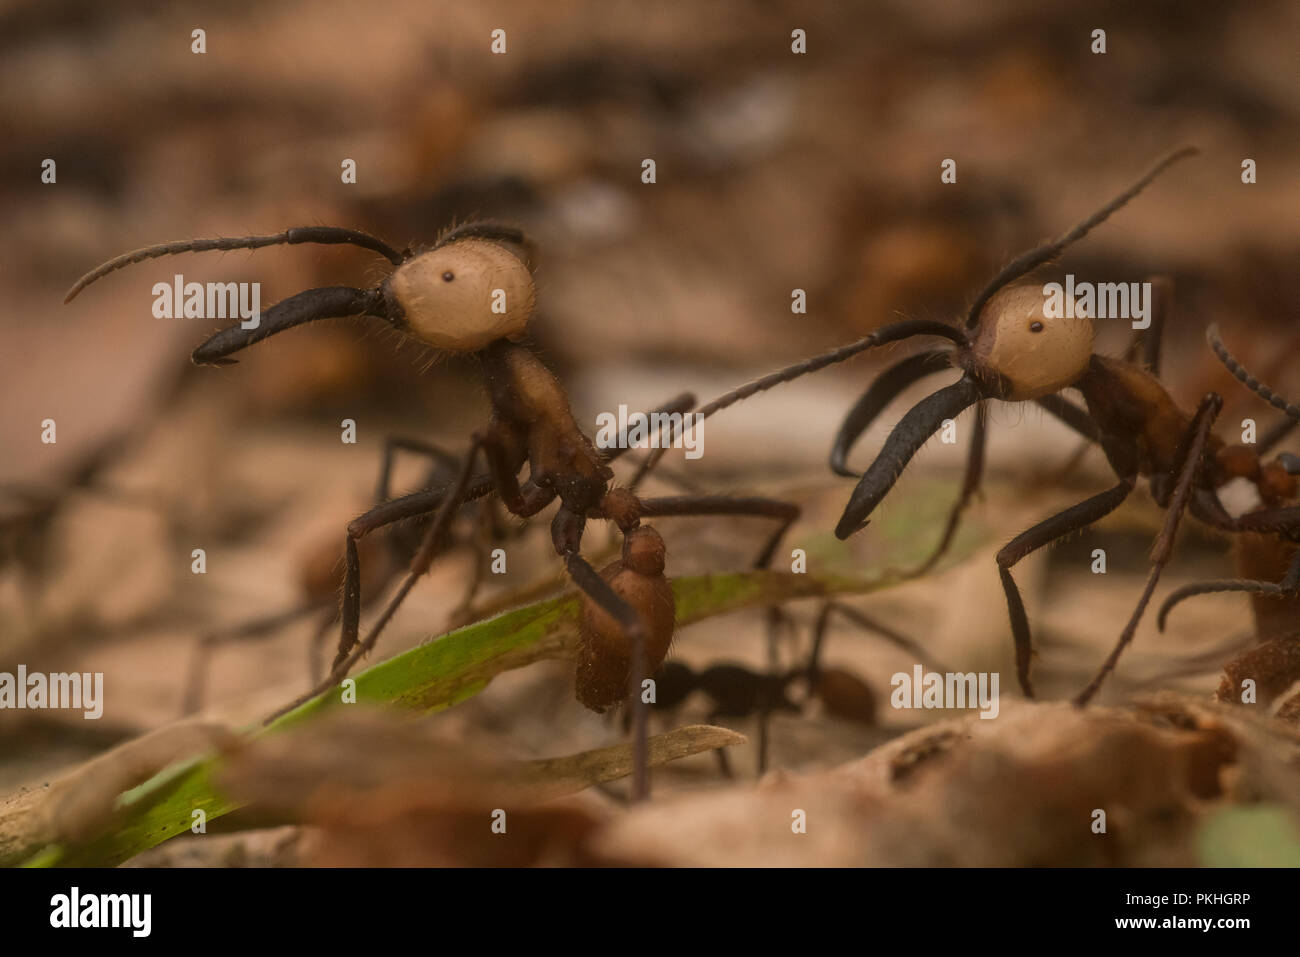 Army ants swarm across the forest floor in huge numbers.  This is Eciton burchellii a common species in South America. Stock Photo